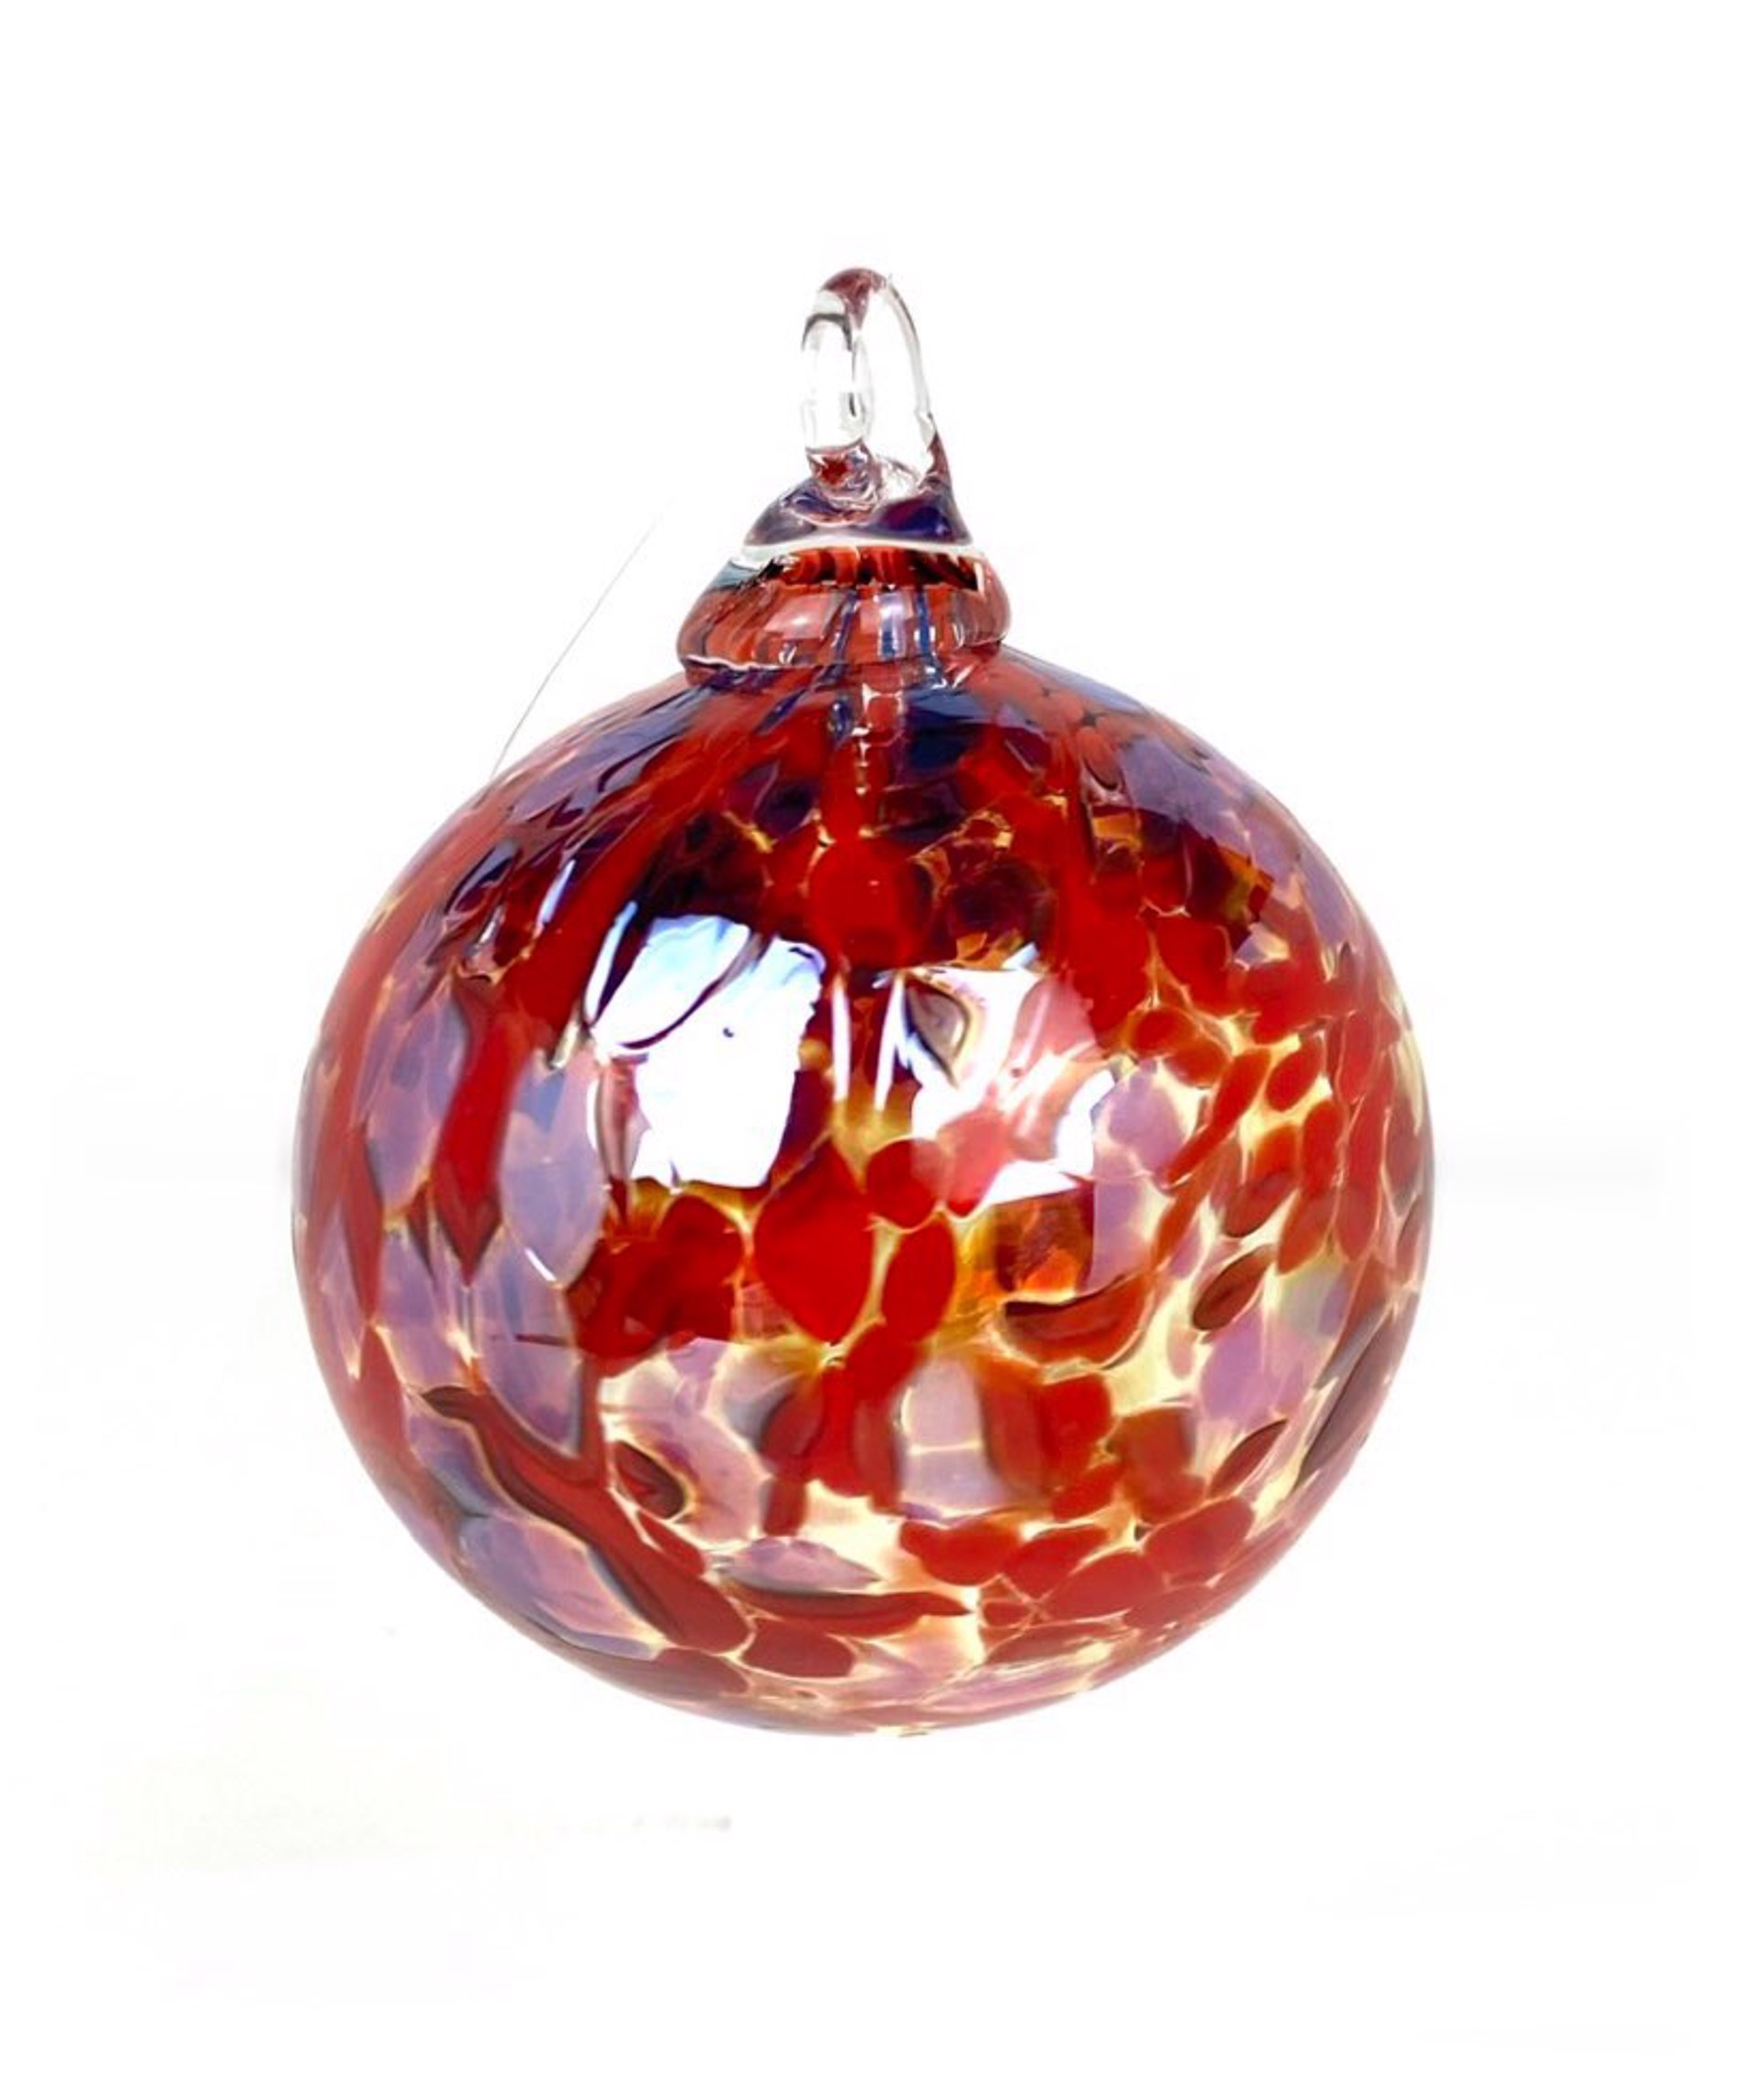 Dapple Red and Silver-Gold  Ornament by Furnace Glass